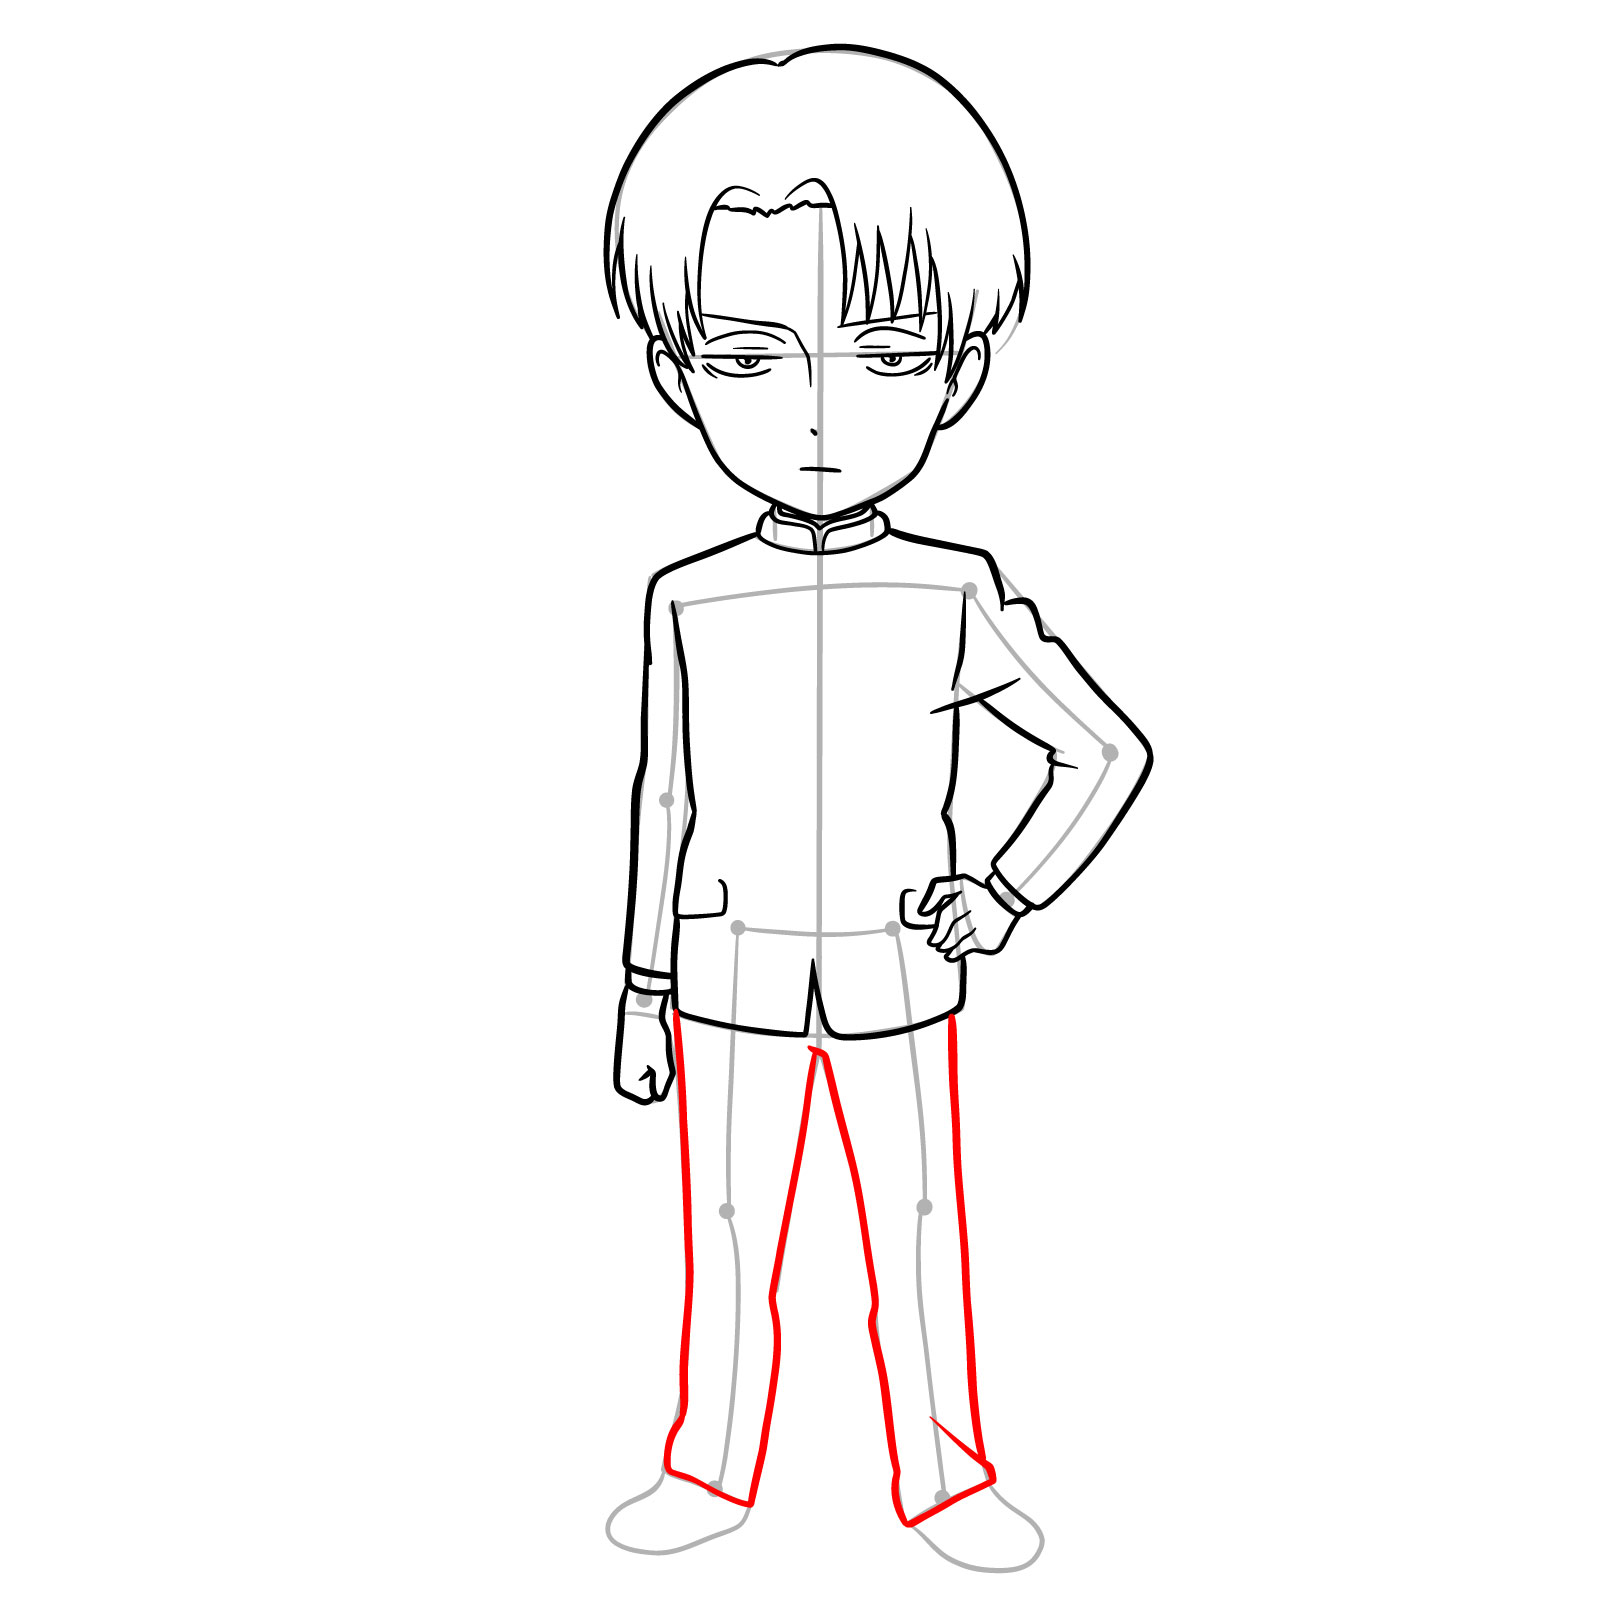 Drawing the pants on chibi Levi in the step-by-step guide - step 16